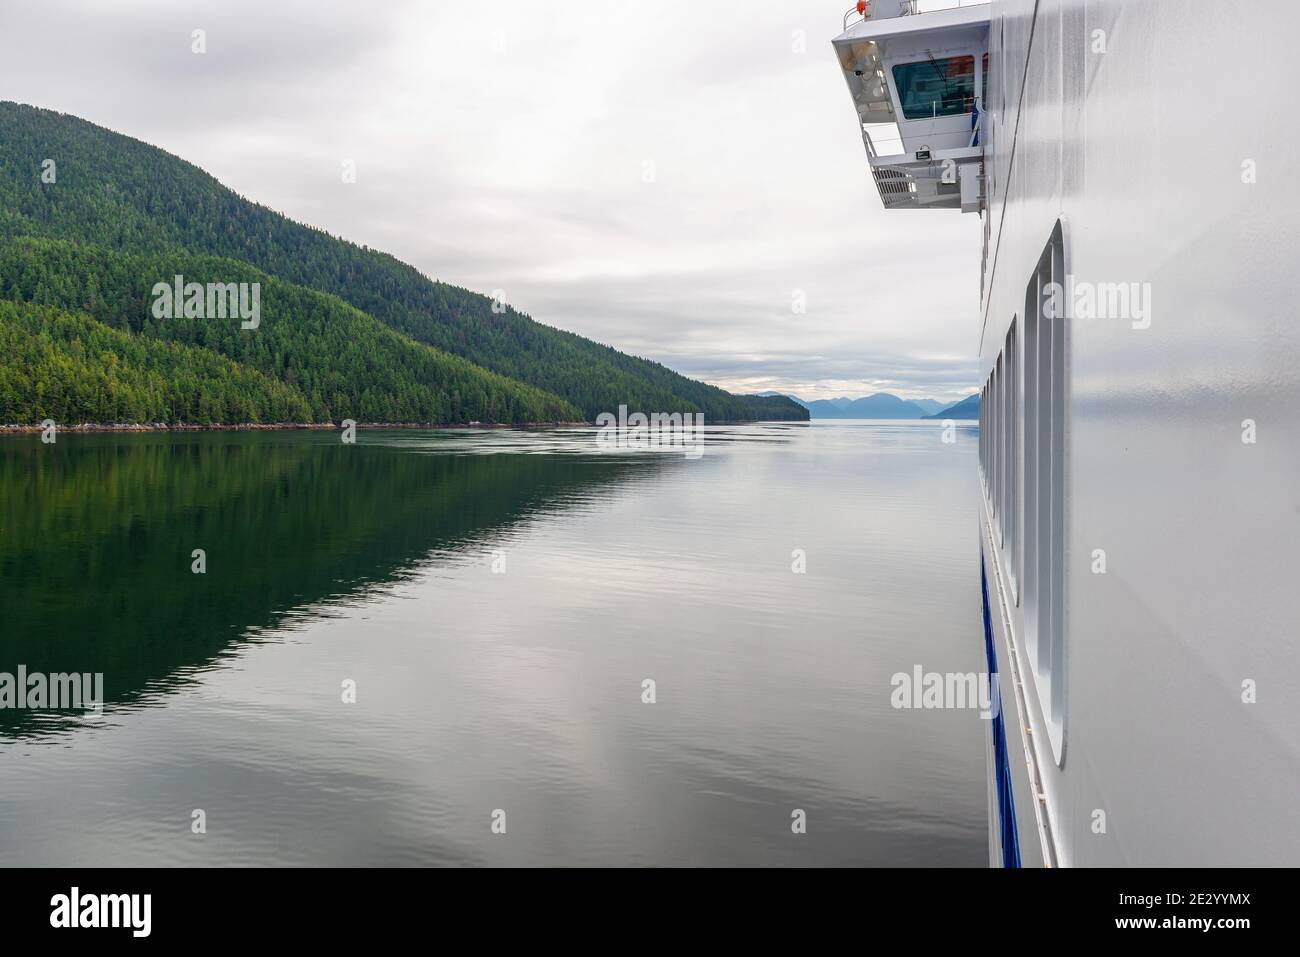 Landscape along the Inside Passage cruise seen from cruise ship, Vancouver Island, British Columbia, Canada. Focus on boat. Stock Photo